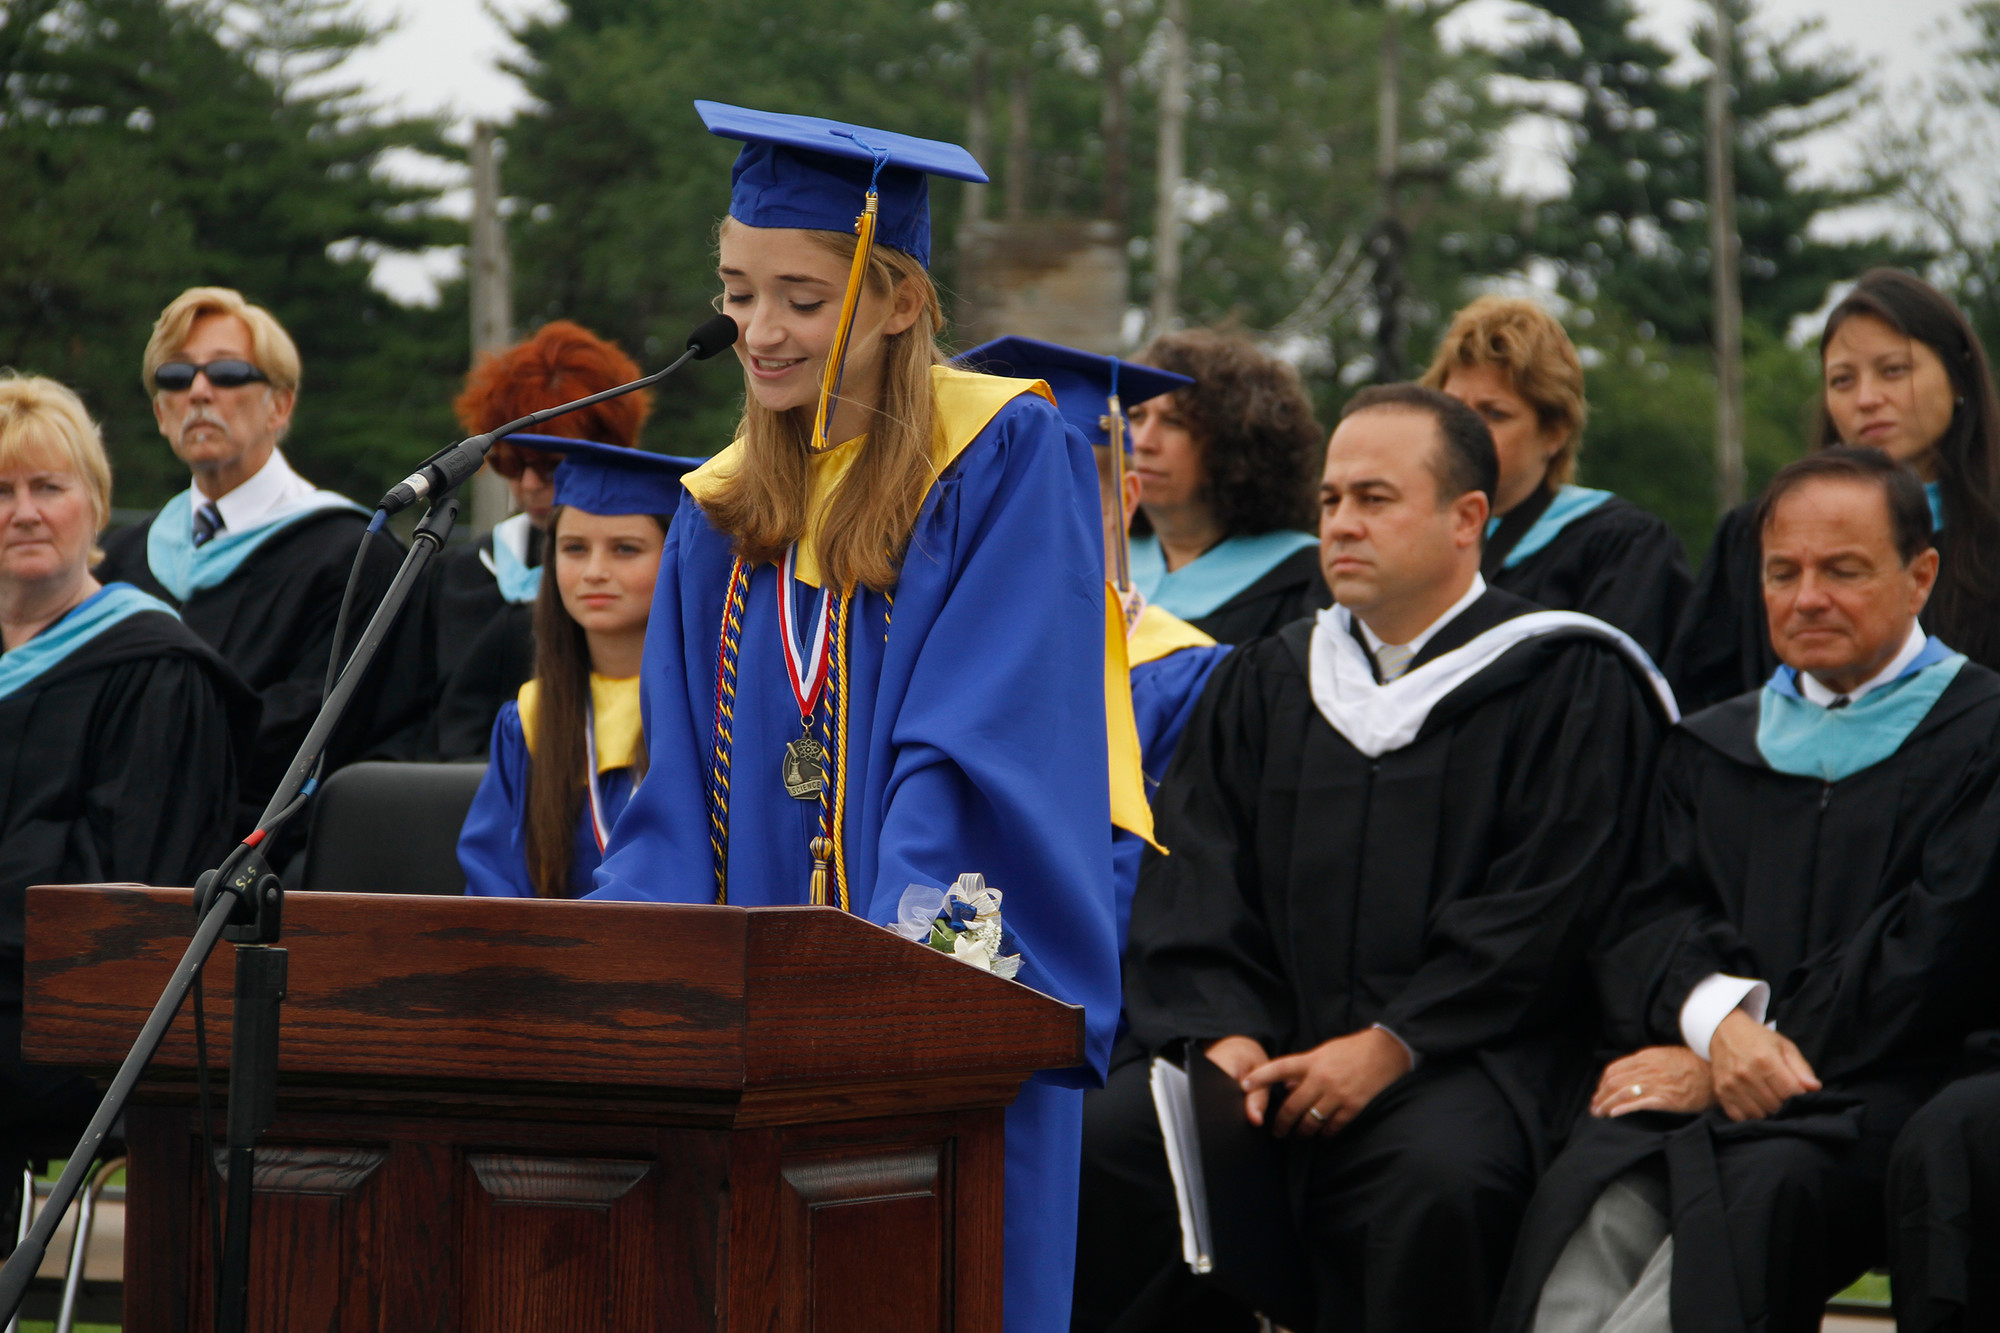 Valedictorian Nicole Newberger shared her classmate’s personal experiences of high school during her commencement speech.